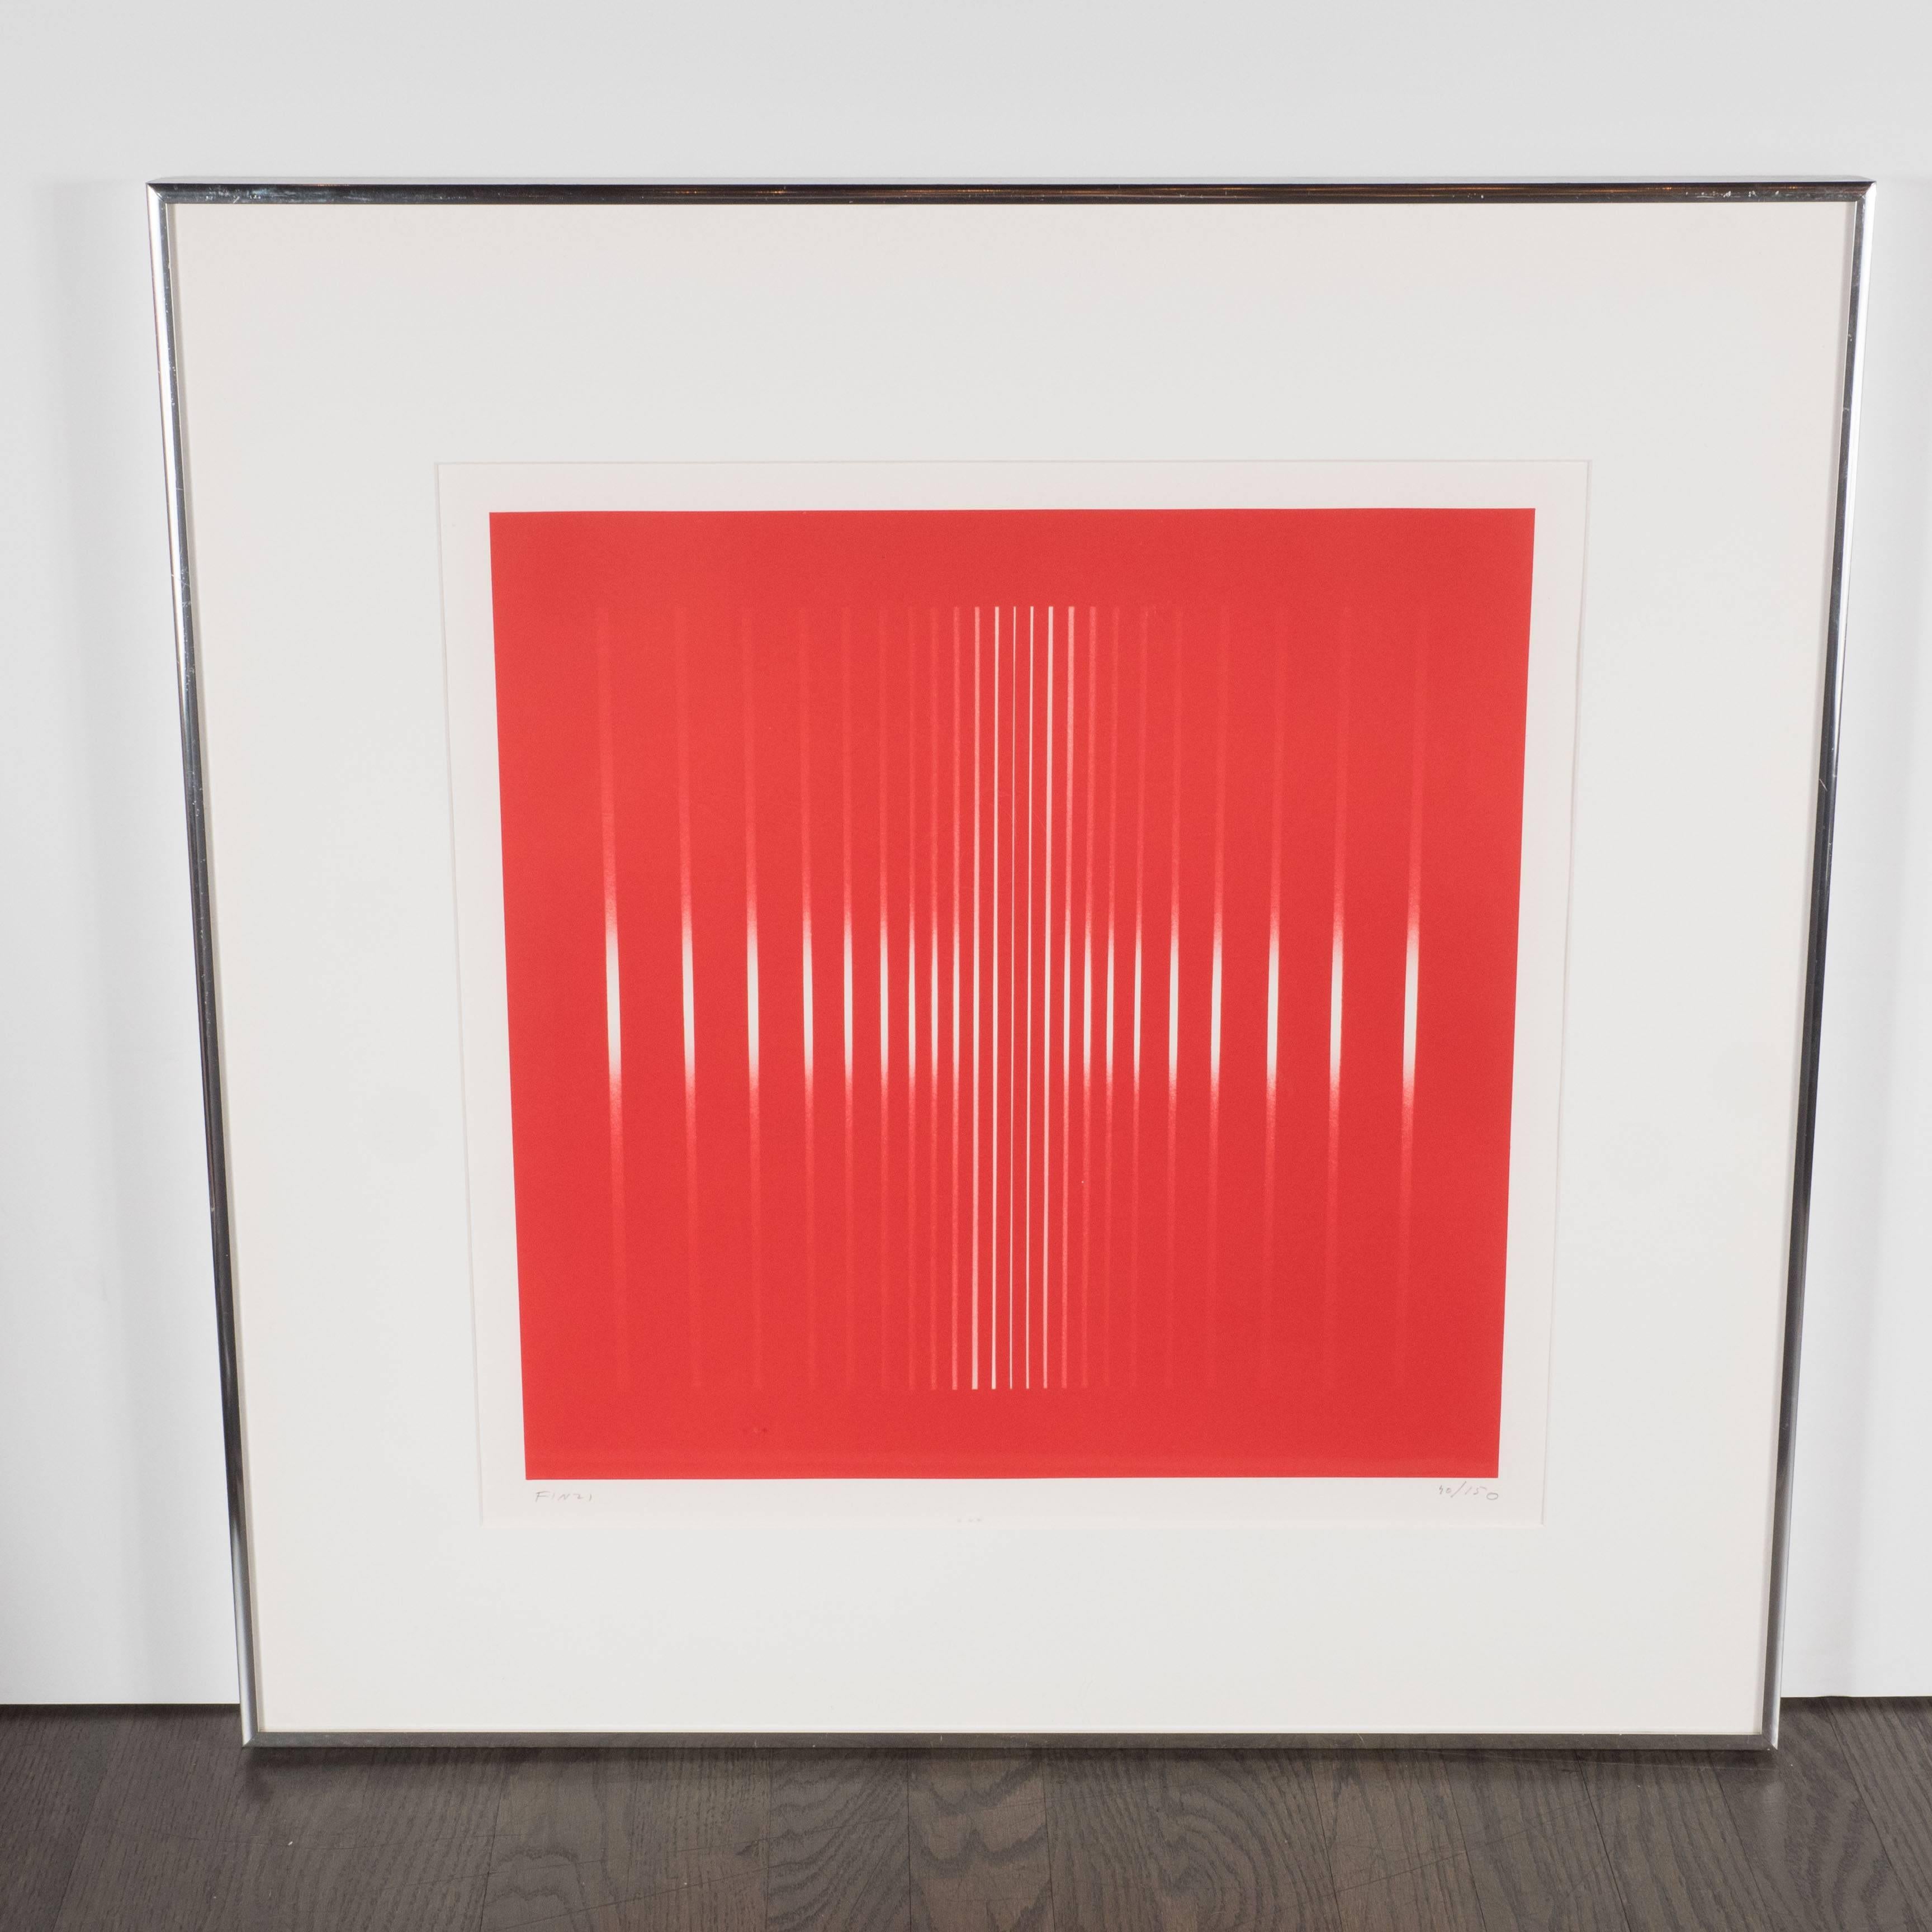 This mid-century modern abstract Op-Art serigraph was realized by Ennio Finzi Circa 1960. Vertical white bands on a candy red background create the sensory illusion of depth and movement. Finzi's work, exemplified by this piece, shares many formal